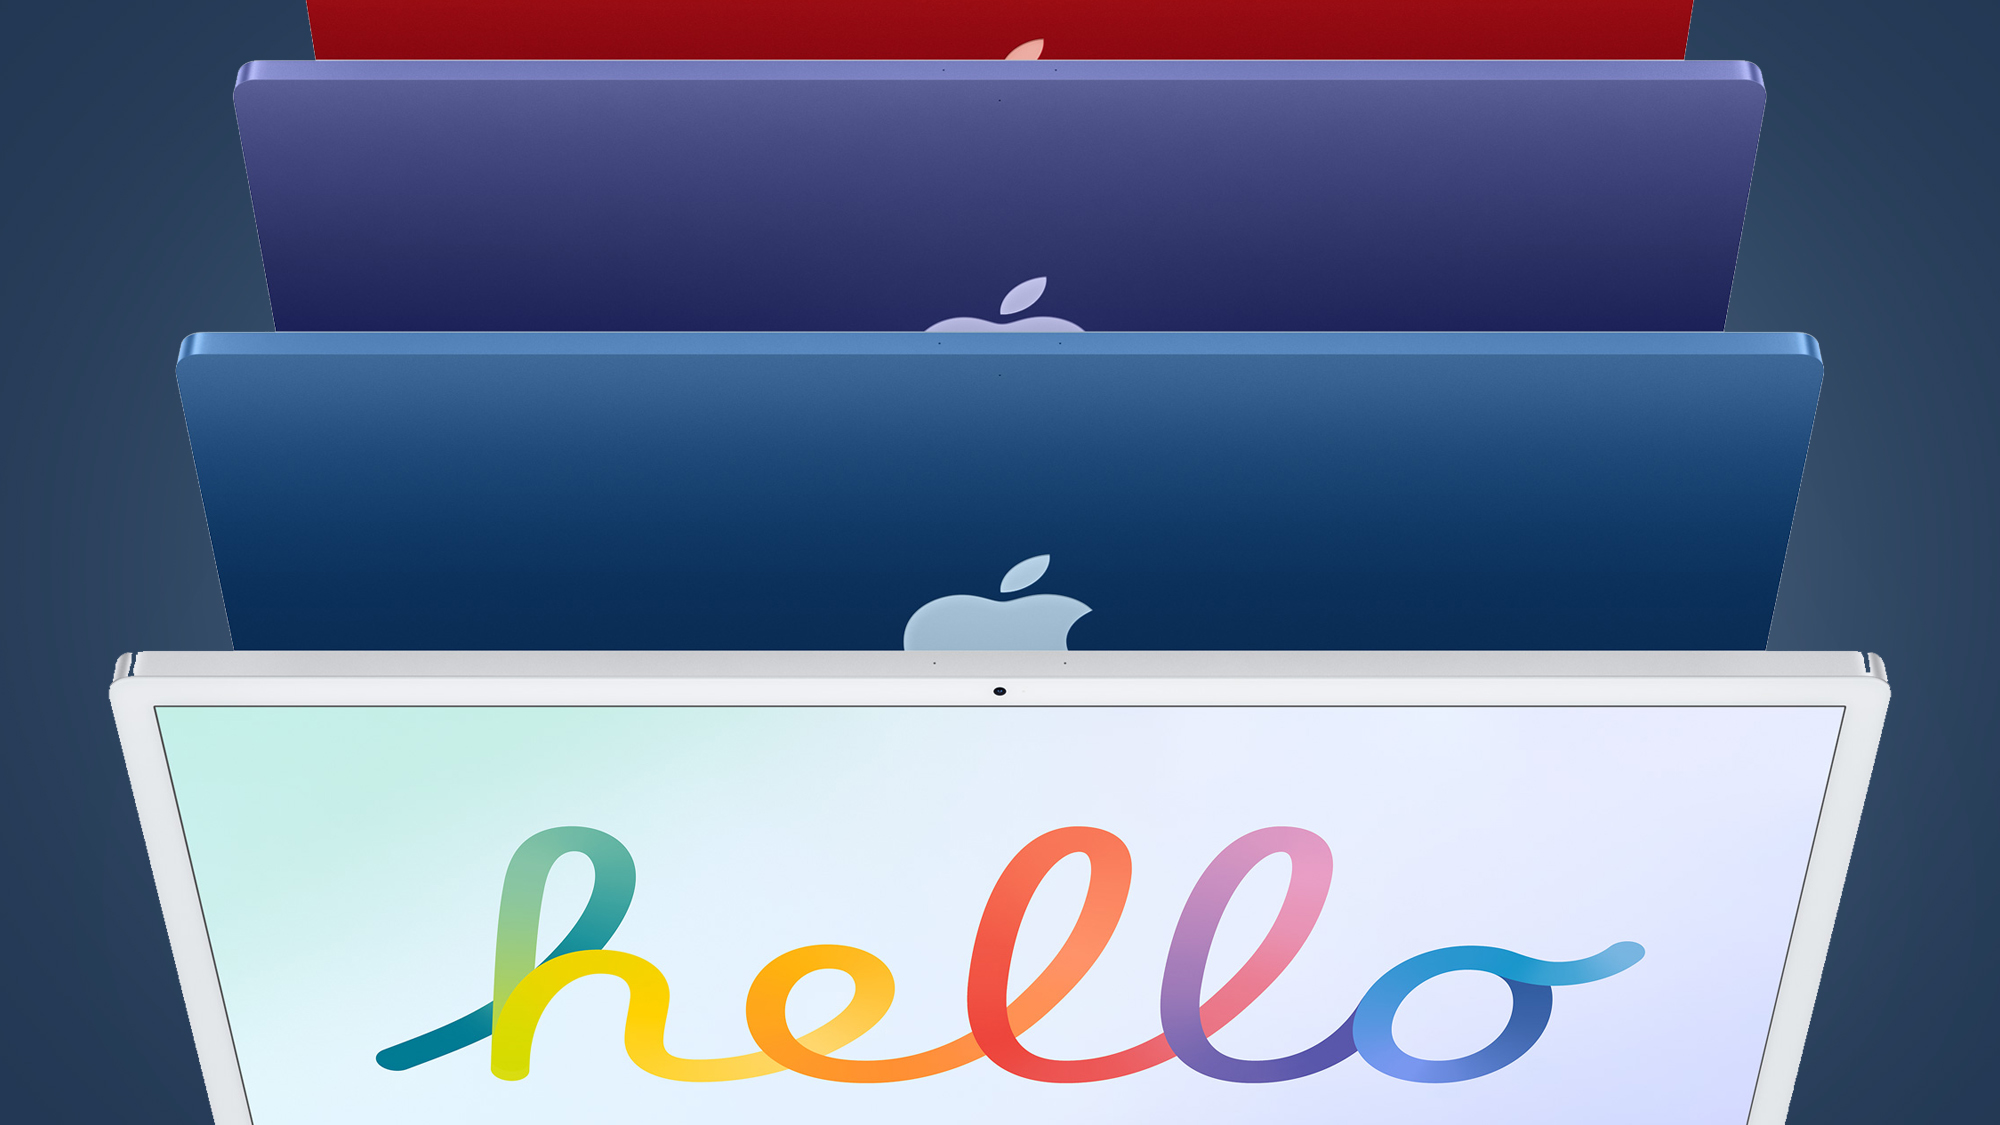 Several Apple iMac colors back to back on a blue background